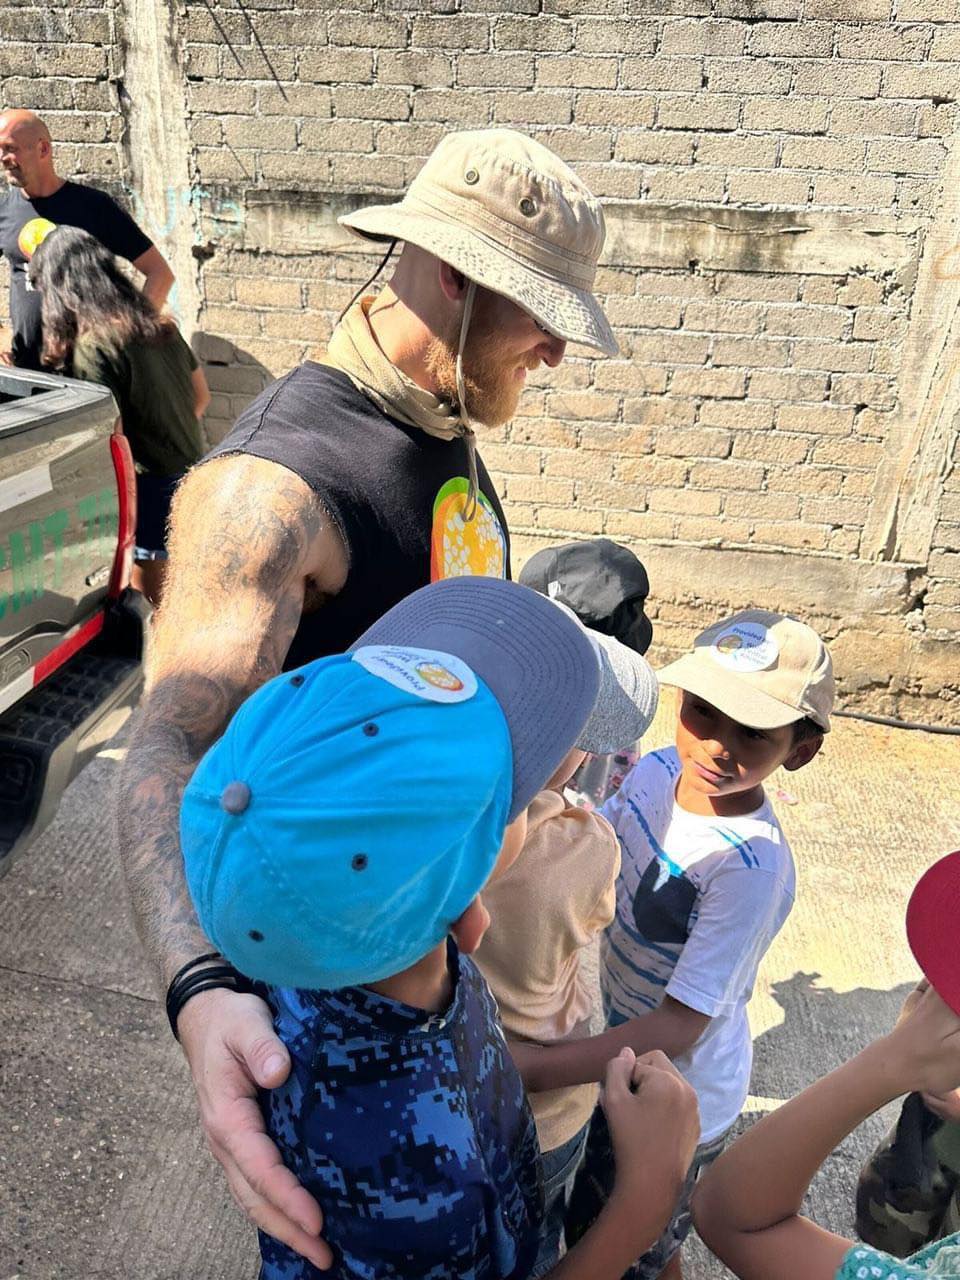 Jacob Flickinger hugging children in Acapulco while on a WCK mission